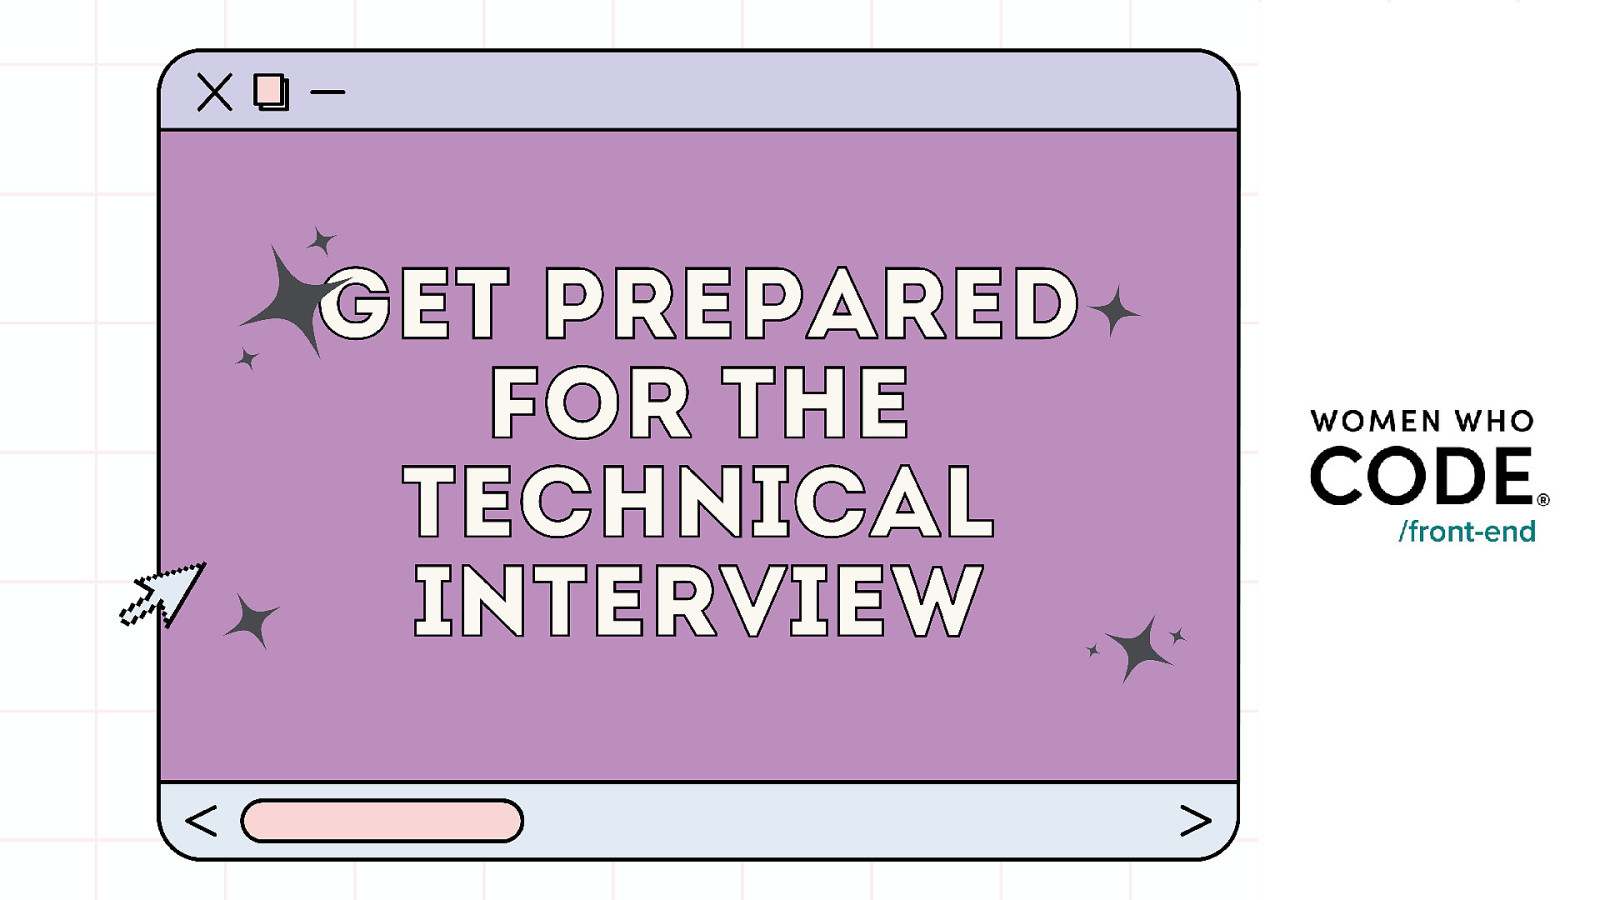 Get Prepared for Technical Interview Workshop